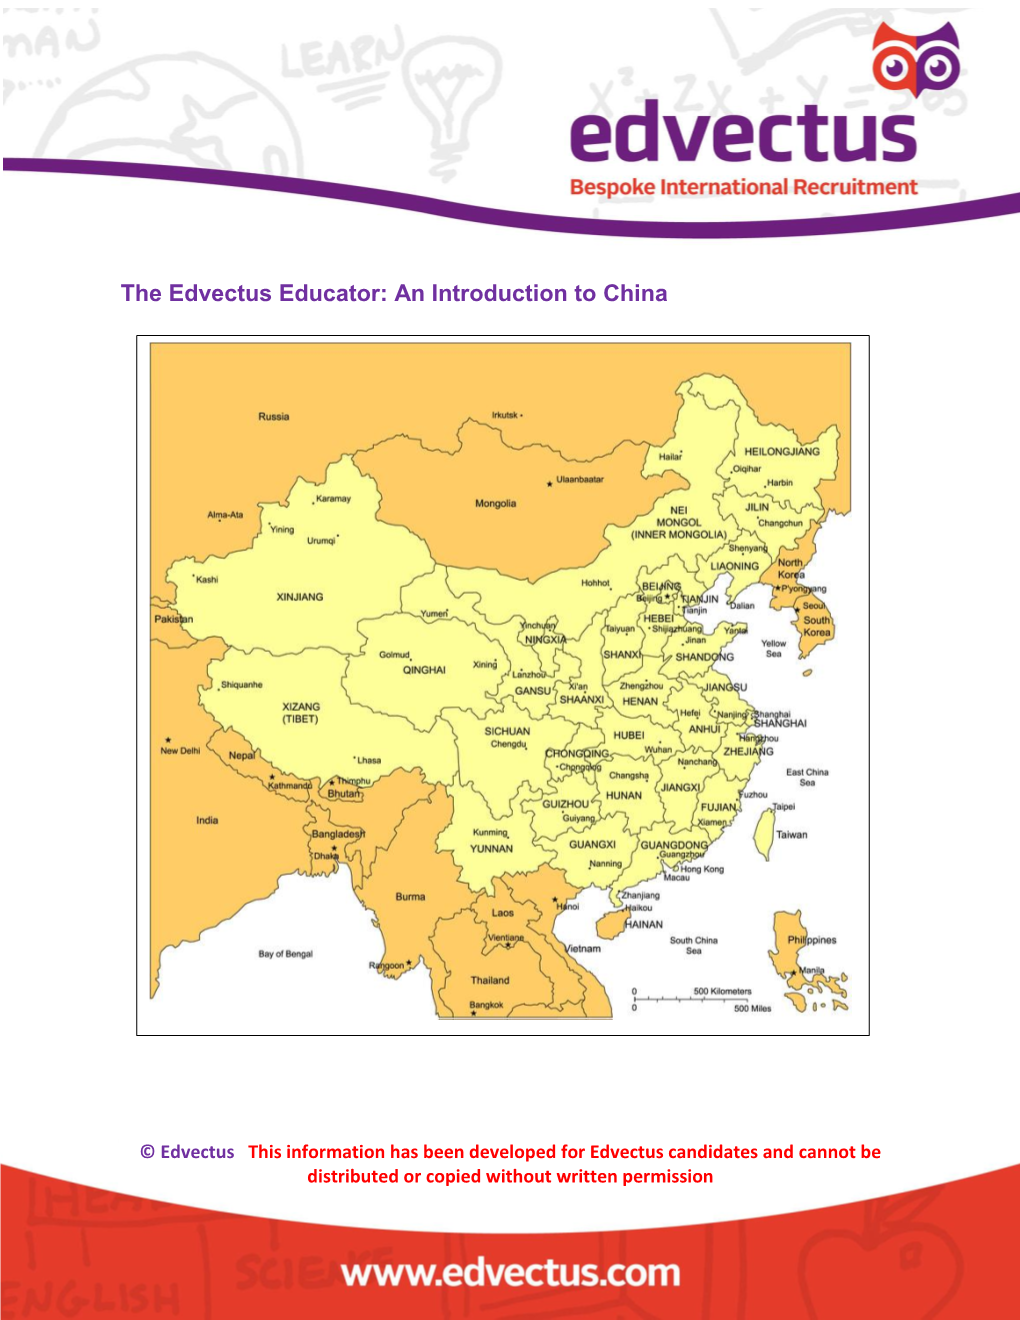 The Edvectus Educator: an Introduction to China